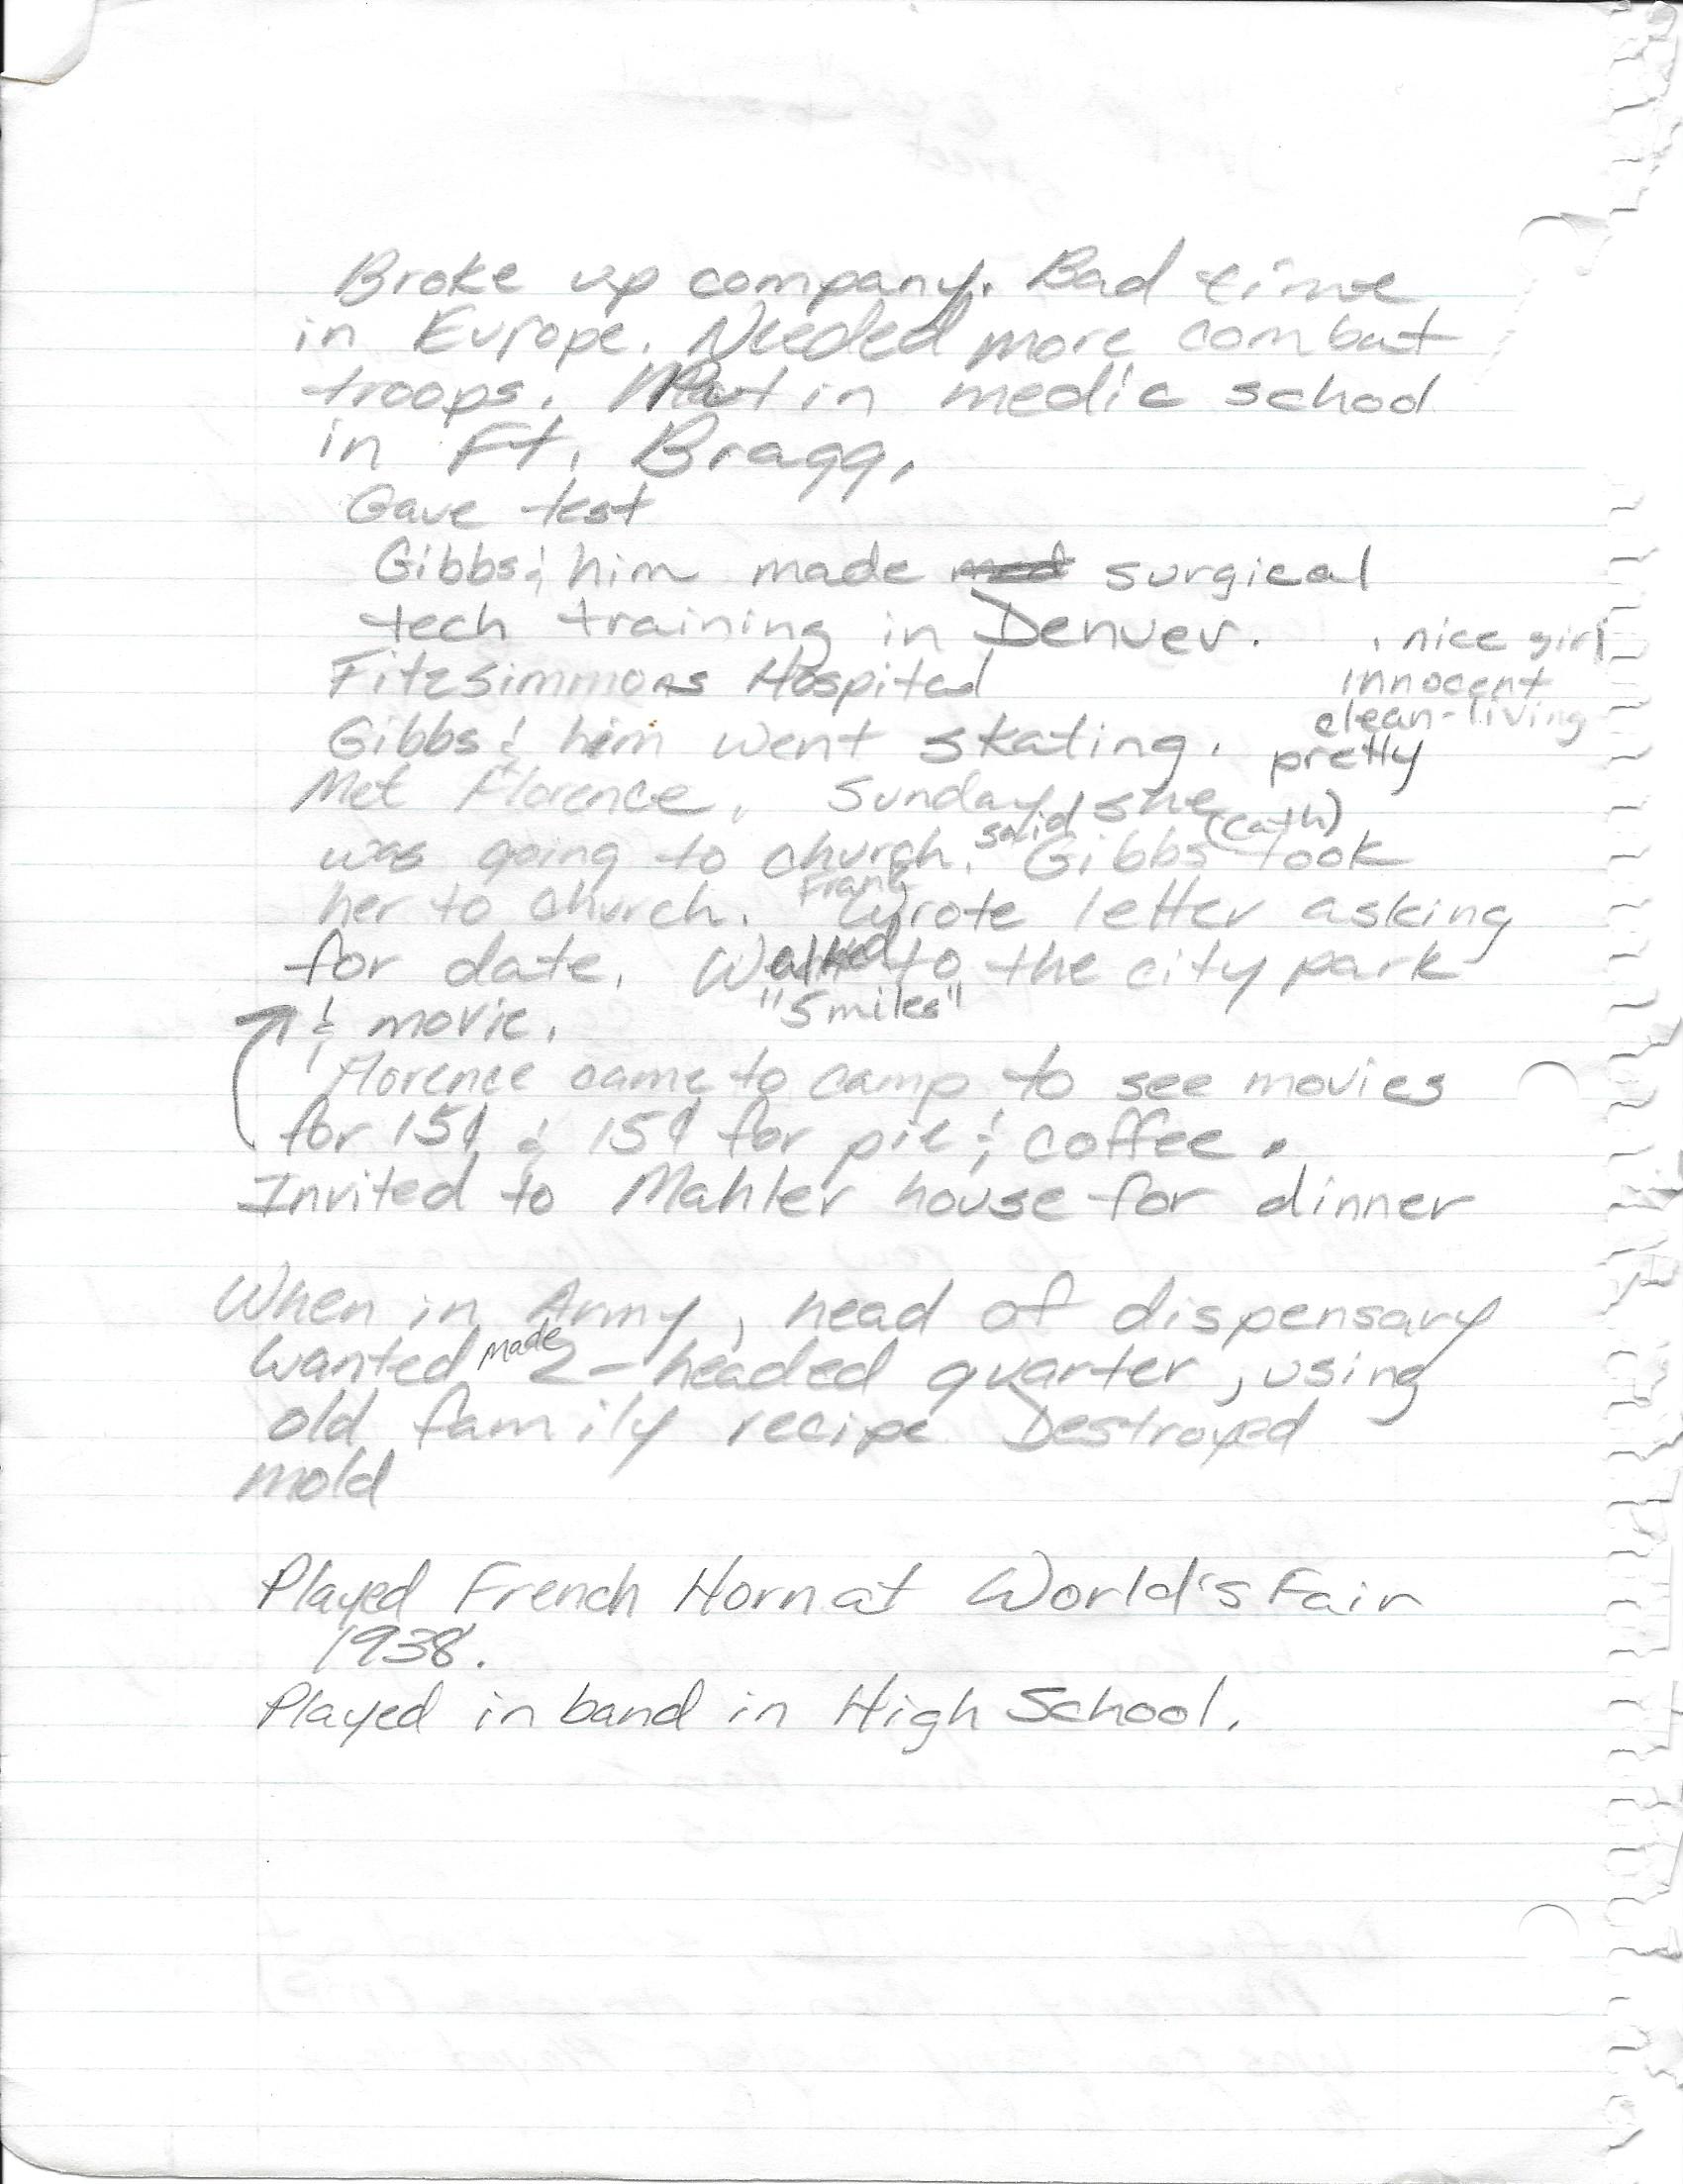 More handwritten notes about Frank Boyd